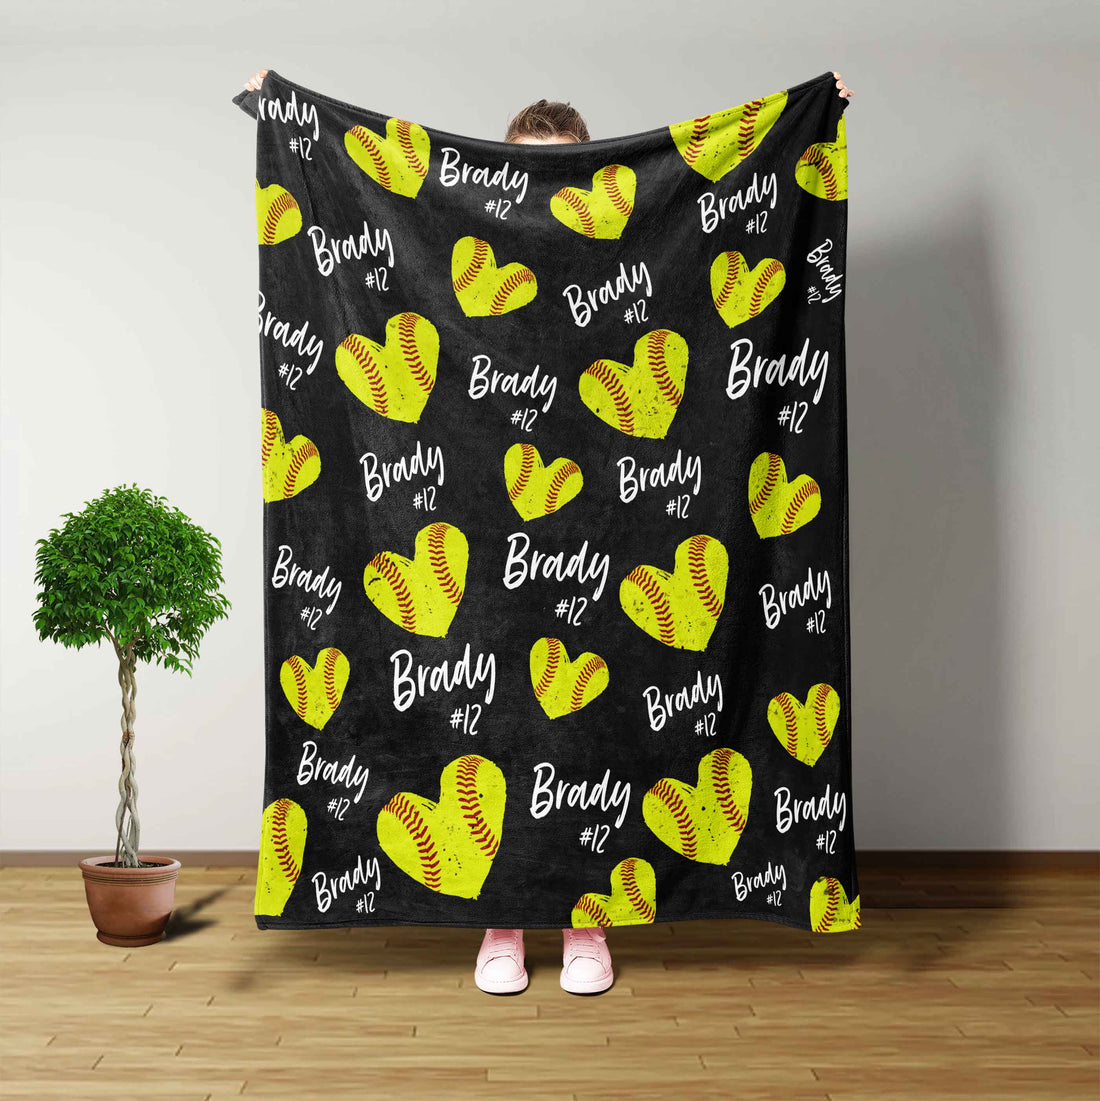 Blanket Design, Soft Ball Gifts, Gift For Boyfriend, Sport Fan, Sport Gifts, Gifts Husband, Gifts Ideas, Decor For Bedroom, Fall Throw Blanket